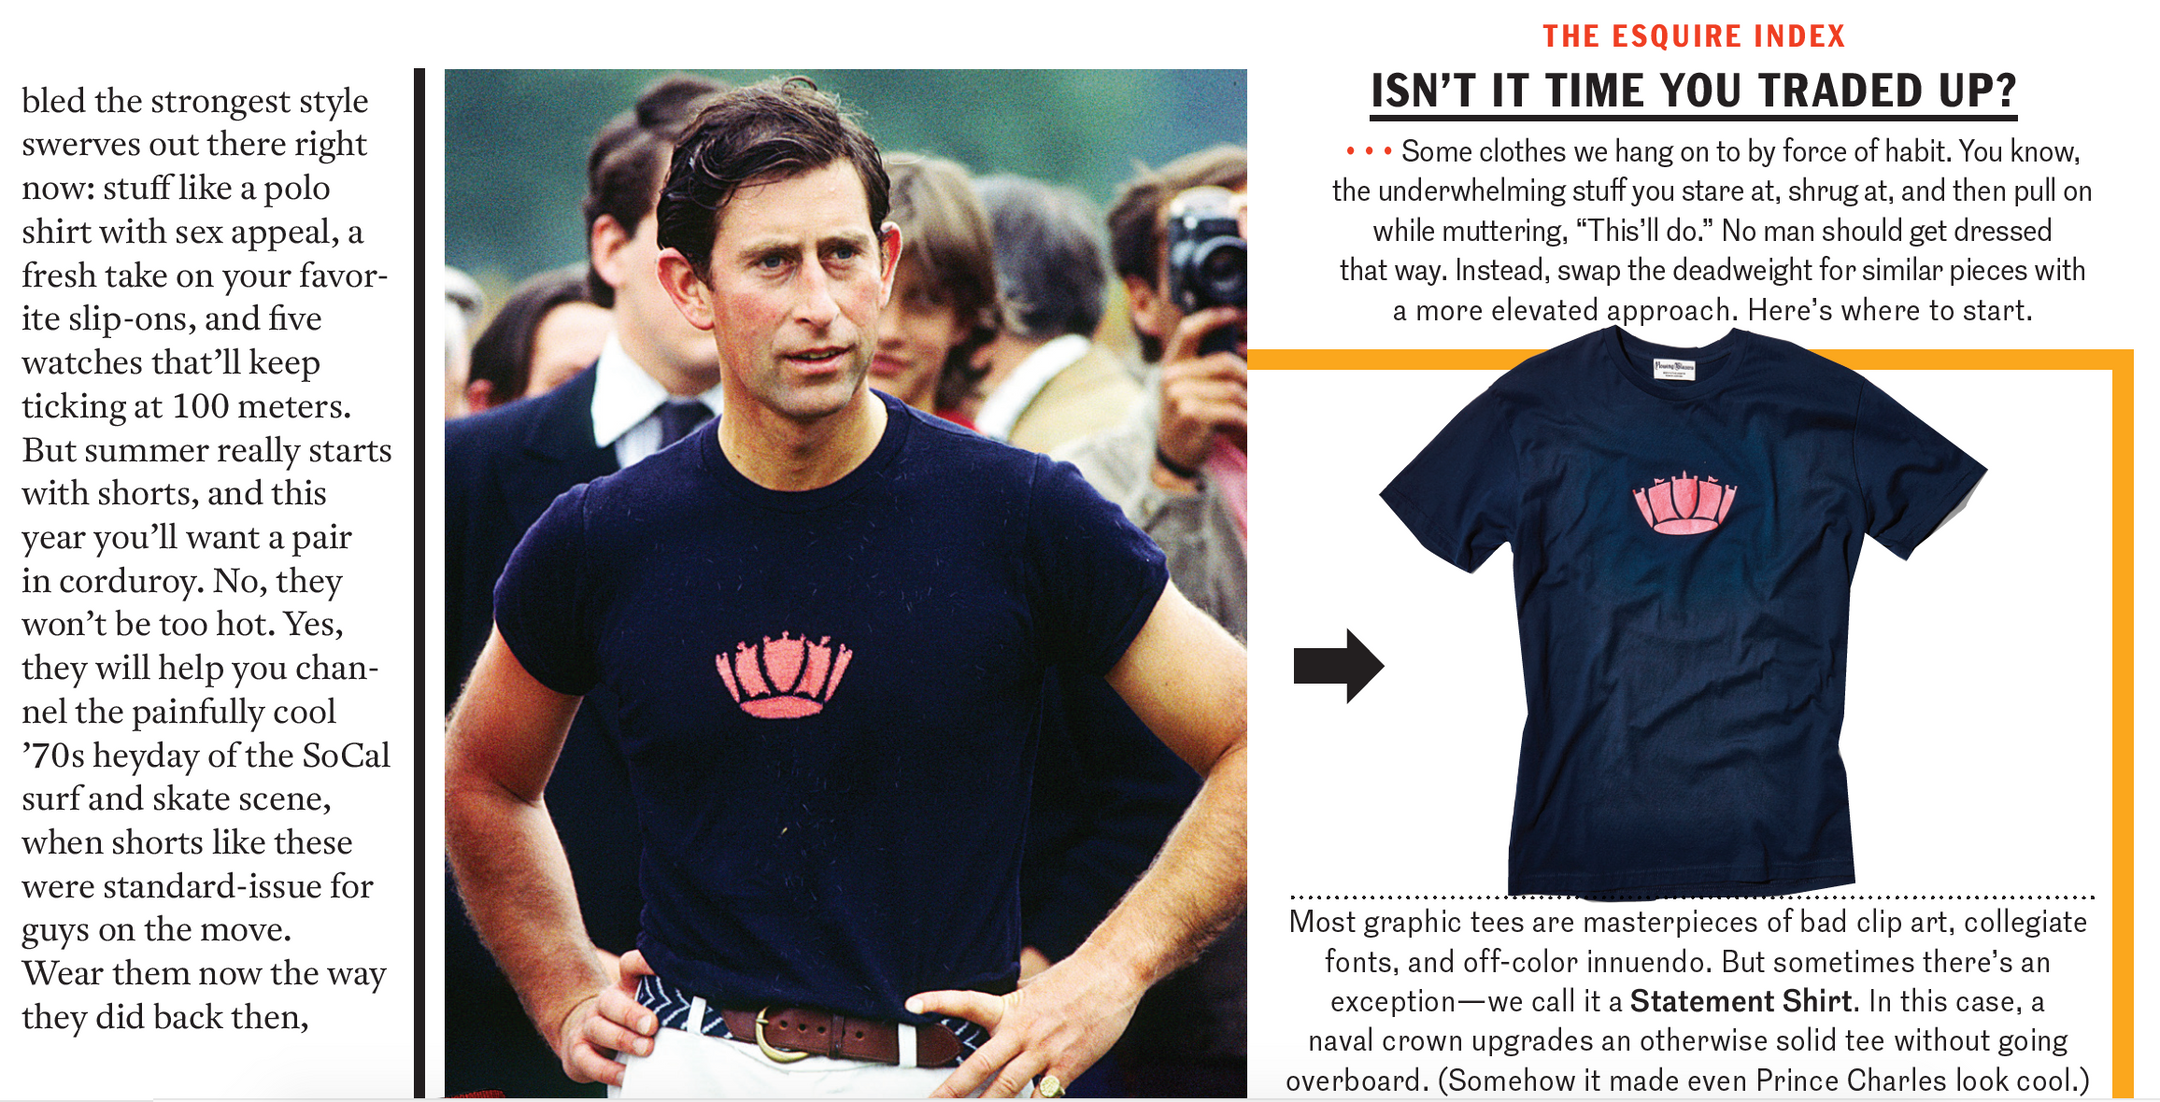 Rowing Blazers featured in Esquire Summer 2018 (Isn't it time you traded up?)